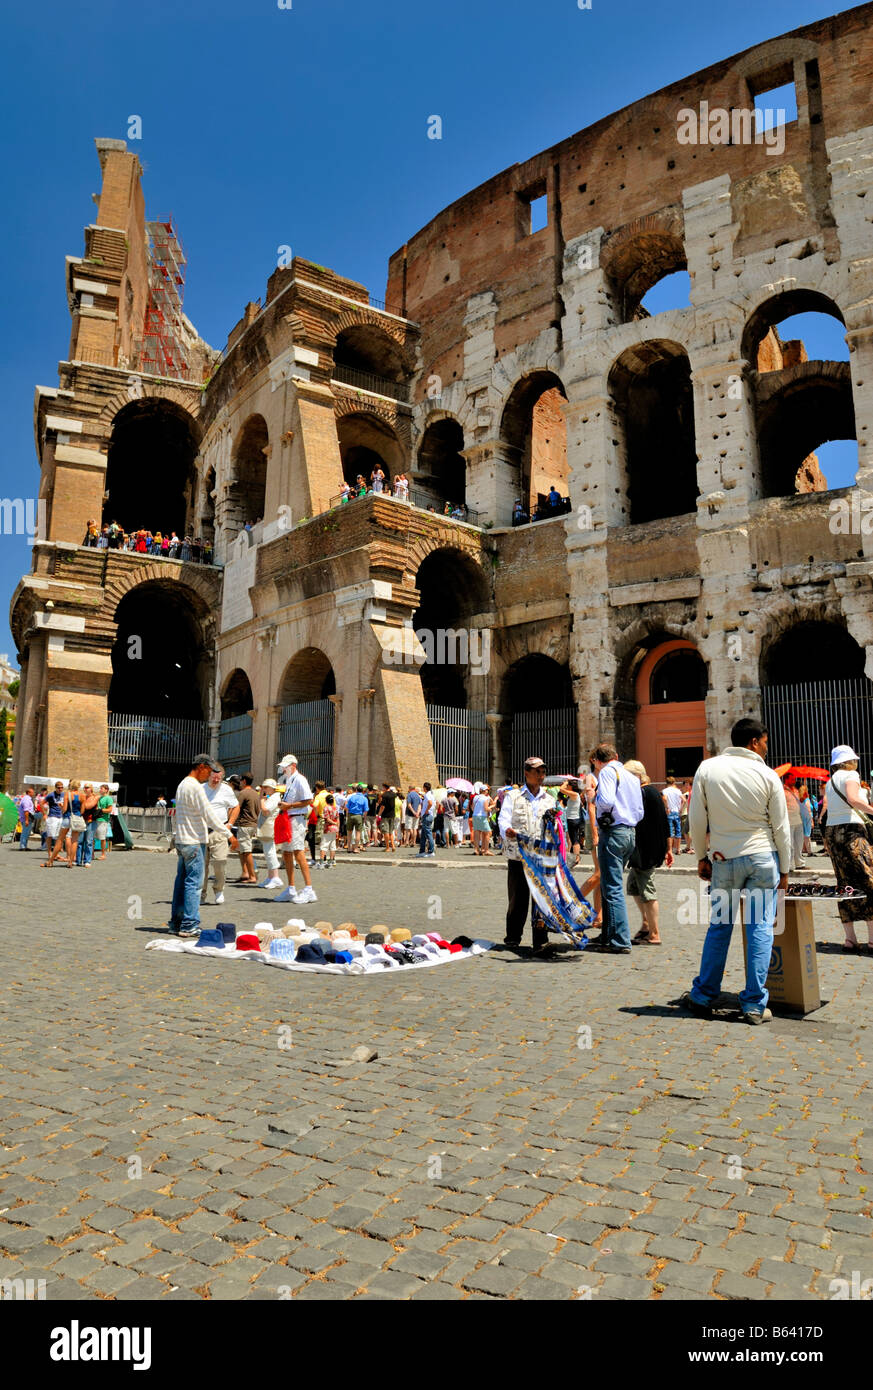 Immigrants sell fake brand goods in the street to tourists by the Colosseum, Rome, Lazio, Italy, Europe. Stock Photo